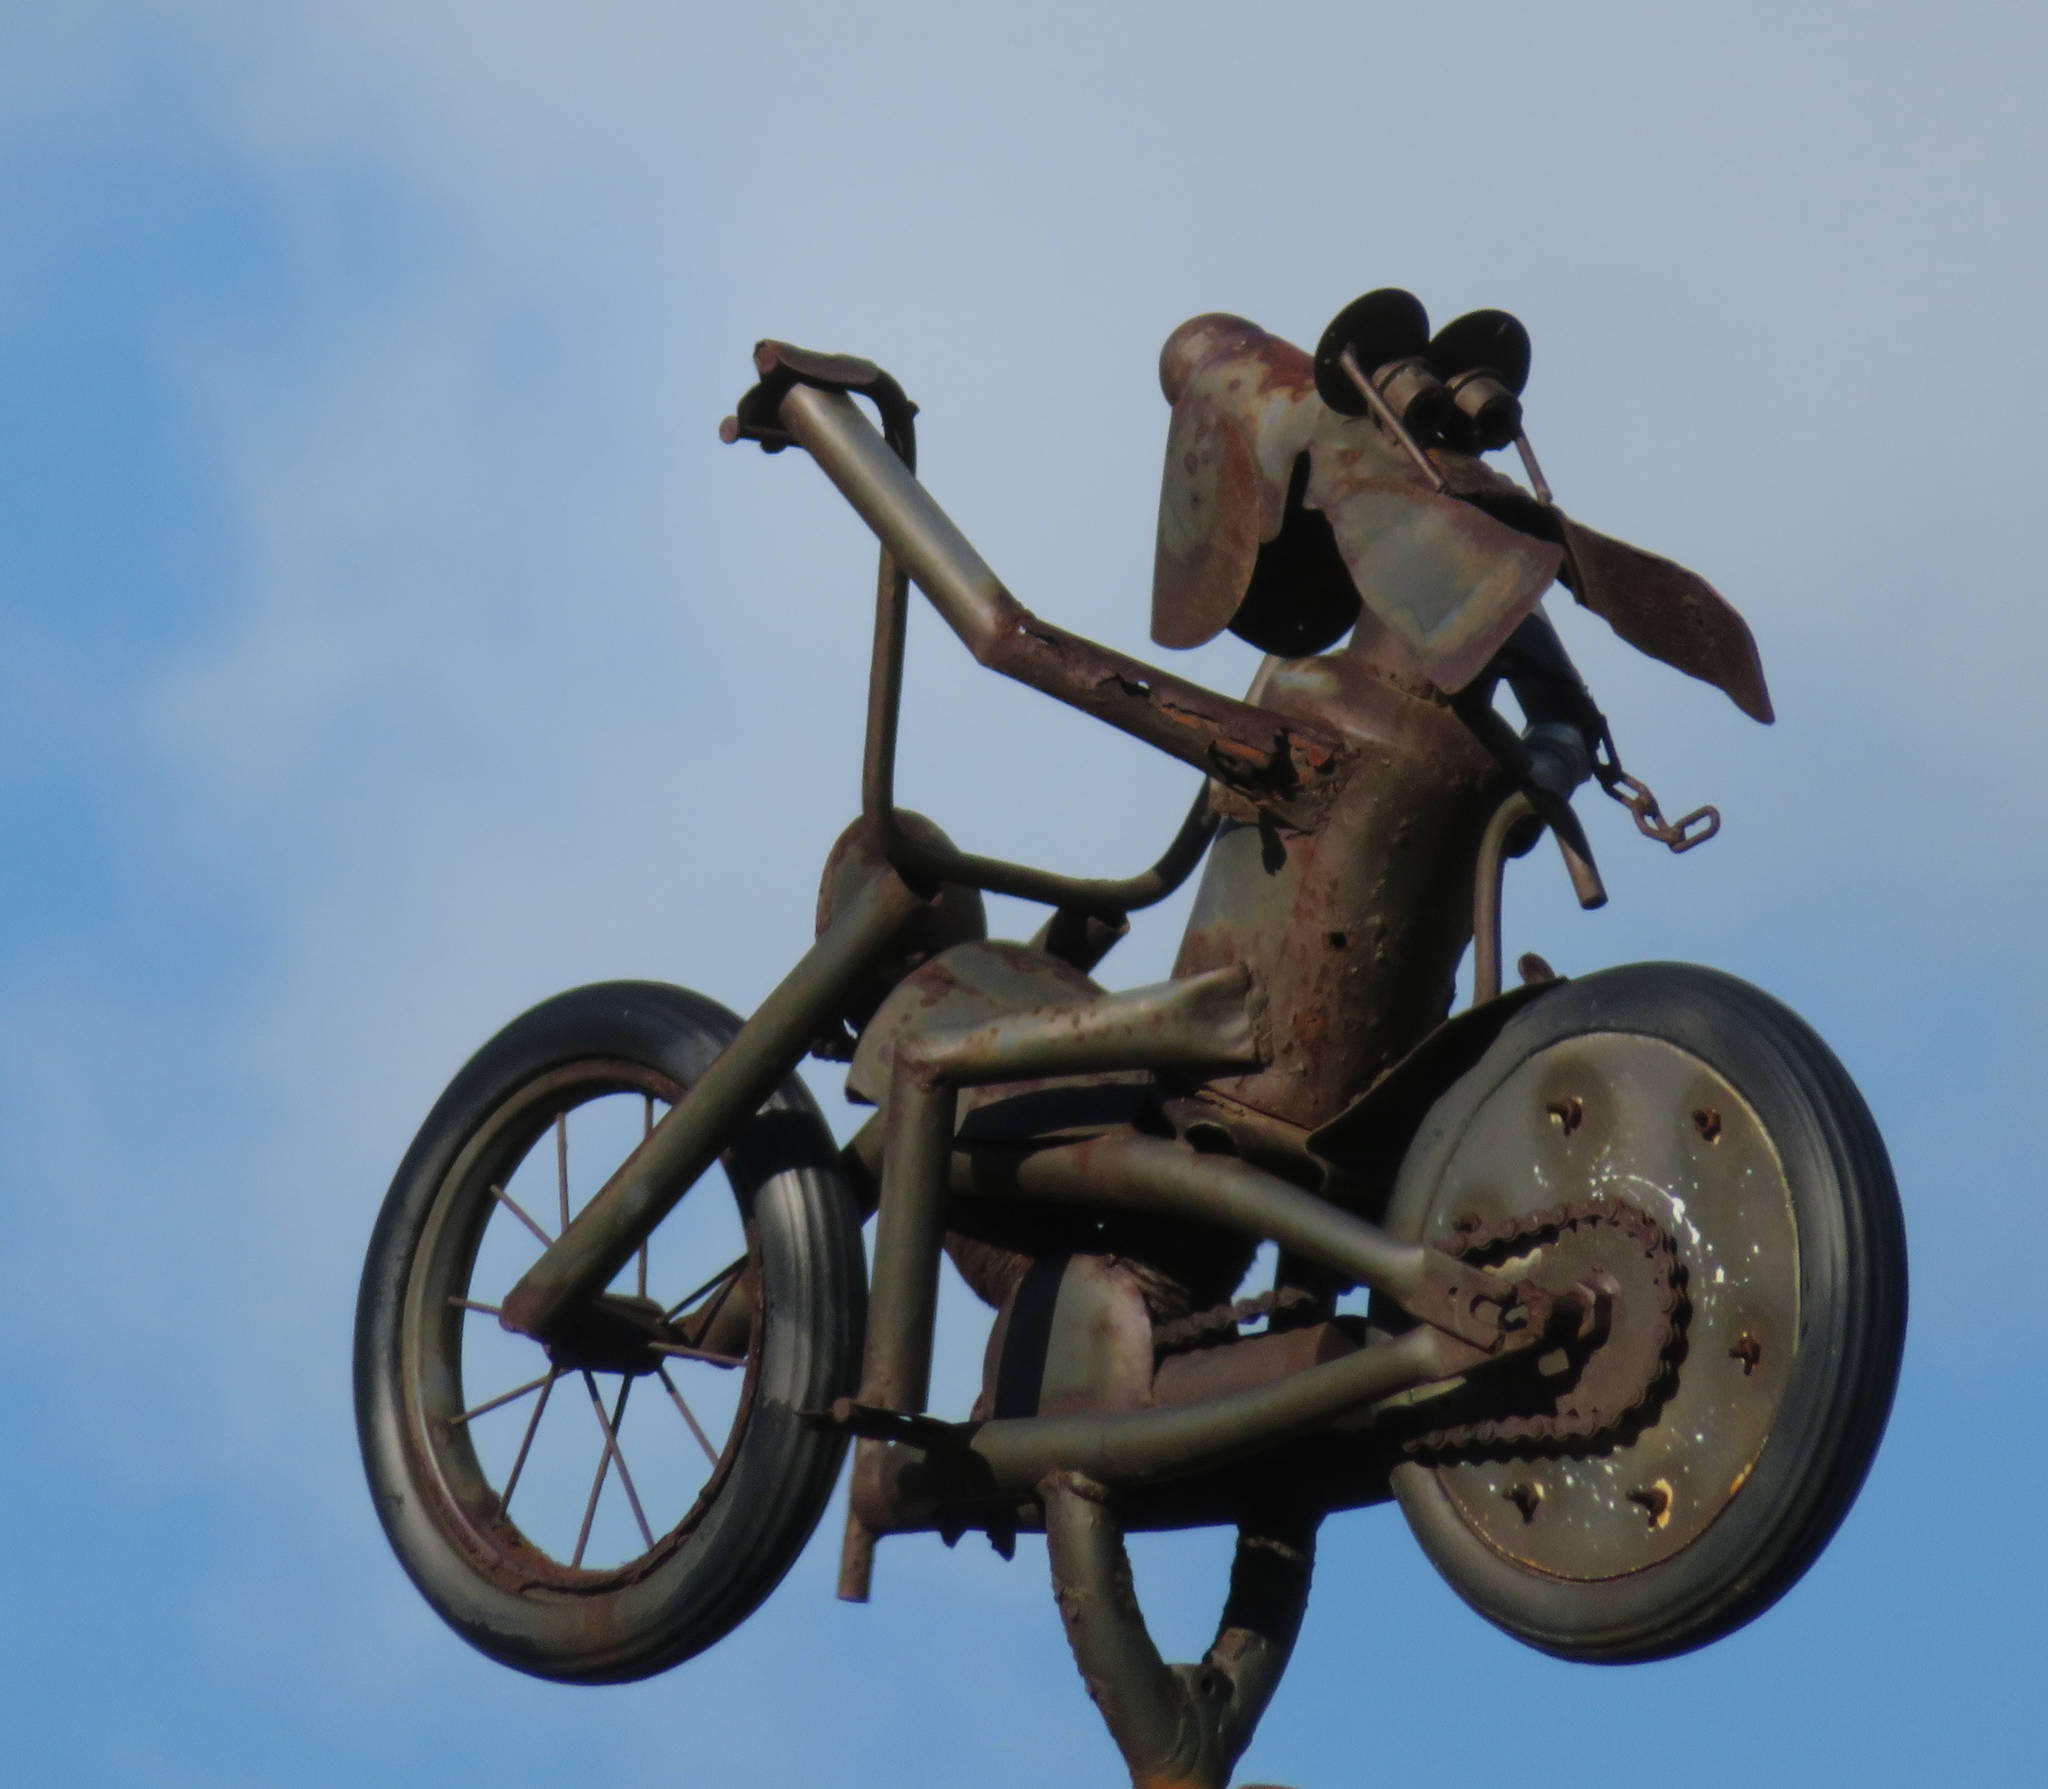 A tin sculpture of a bicyclist cruising above a house in Skagway on May 12, 2019. (Courtesy Photo | Ray Tsang)